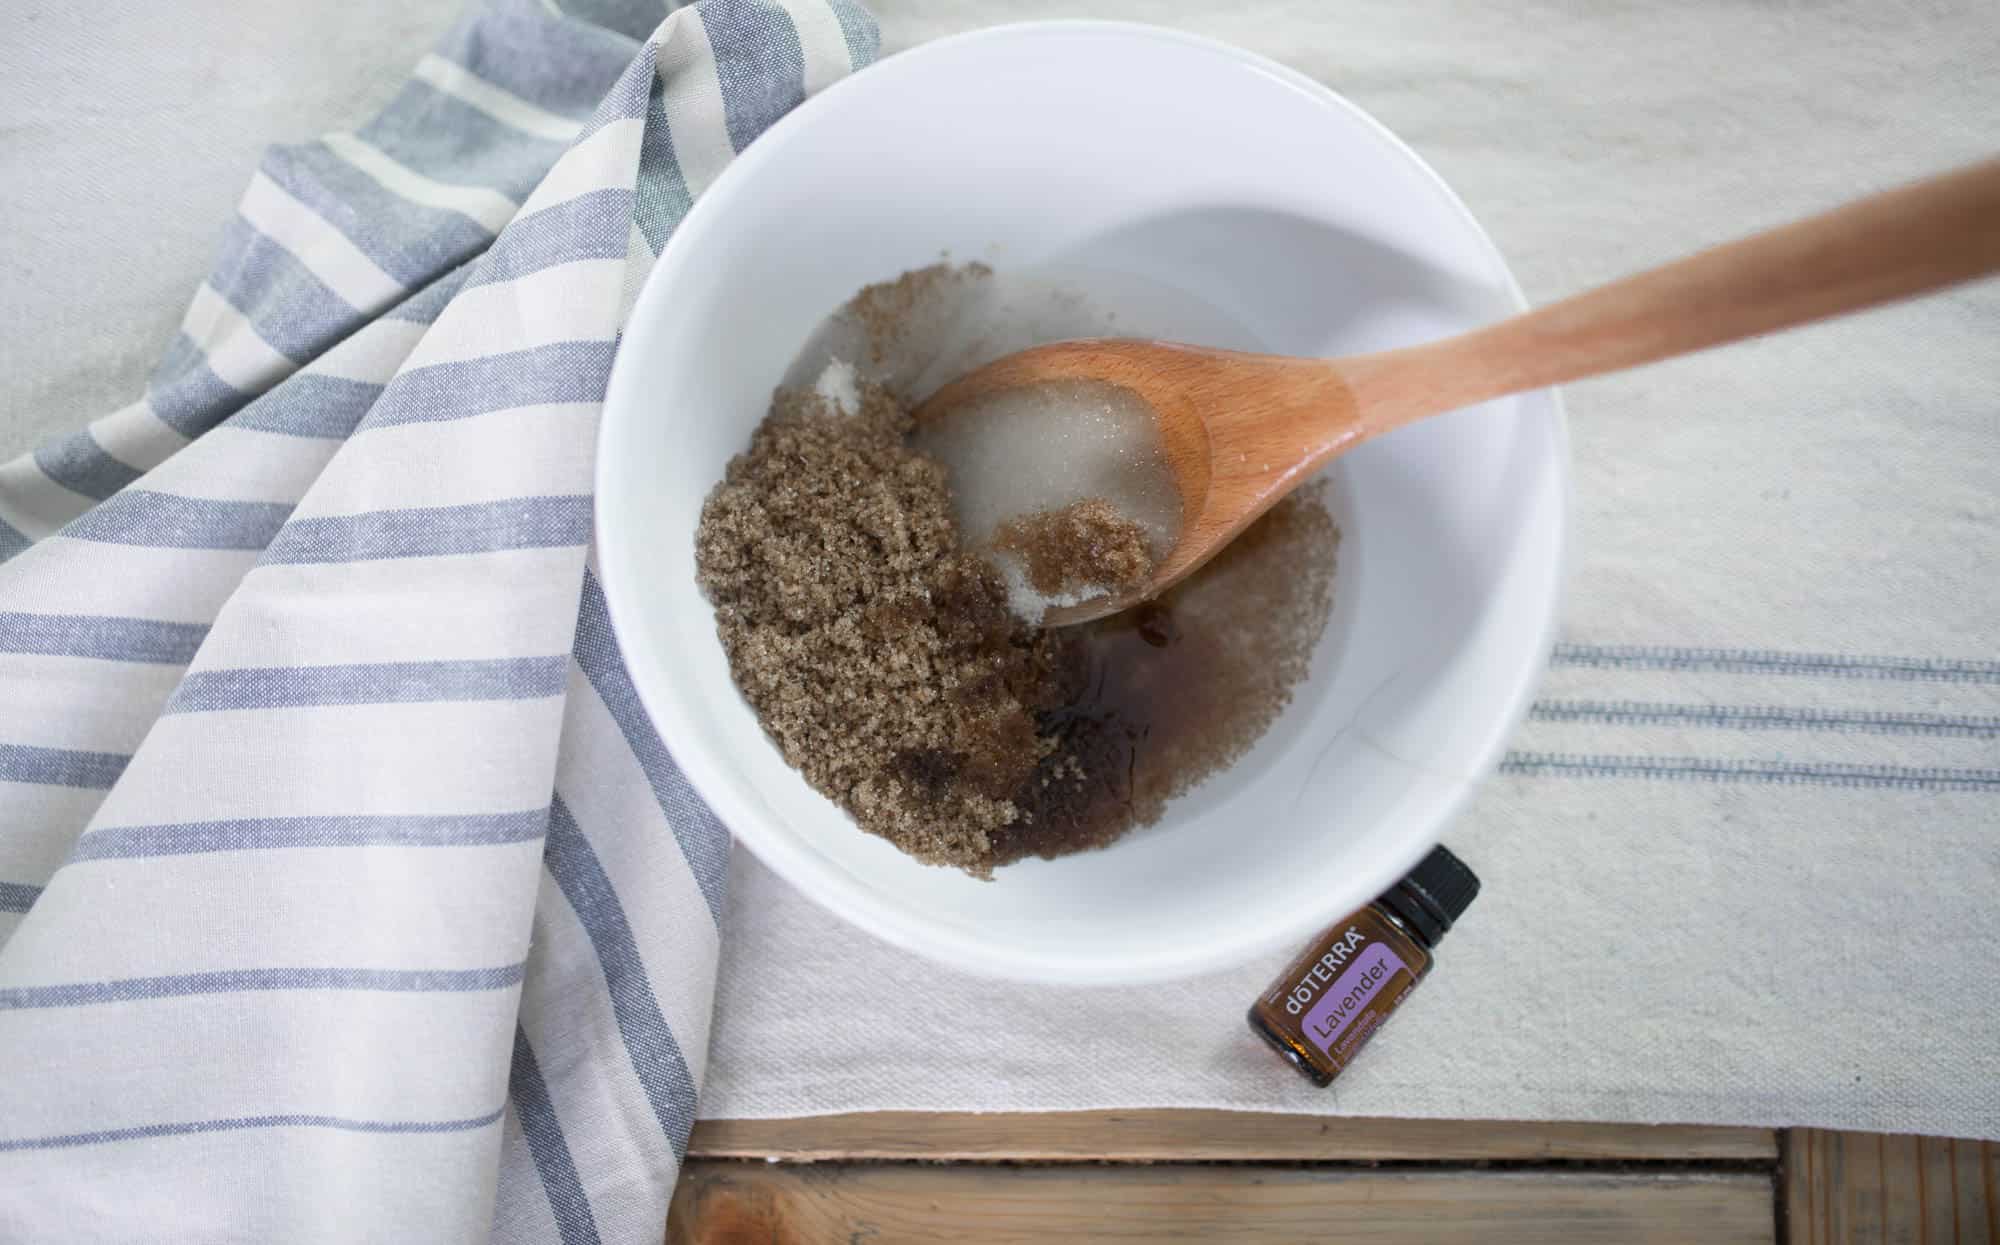 How to Make Homemade Sugar Scrub with Relaxing Lavender Essential Oil